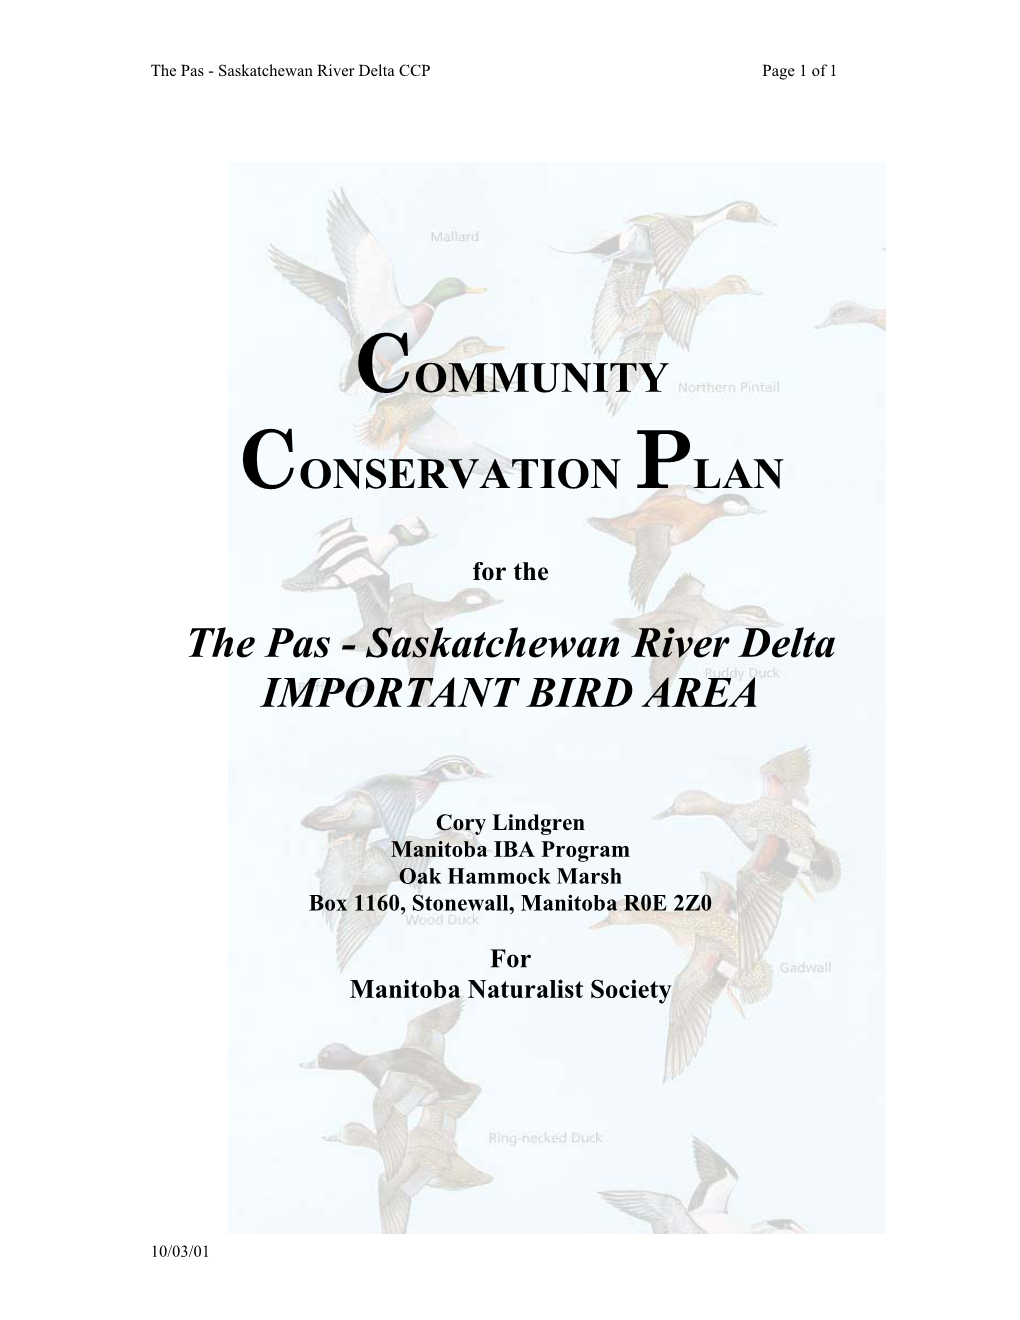 COMMUNITY CONSERVATION PLAN The